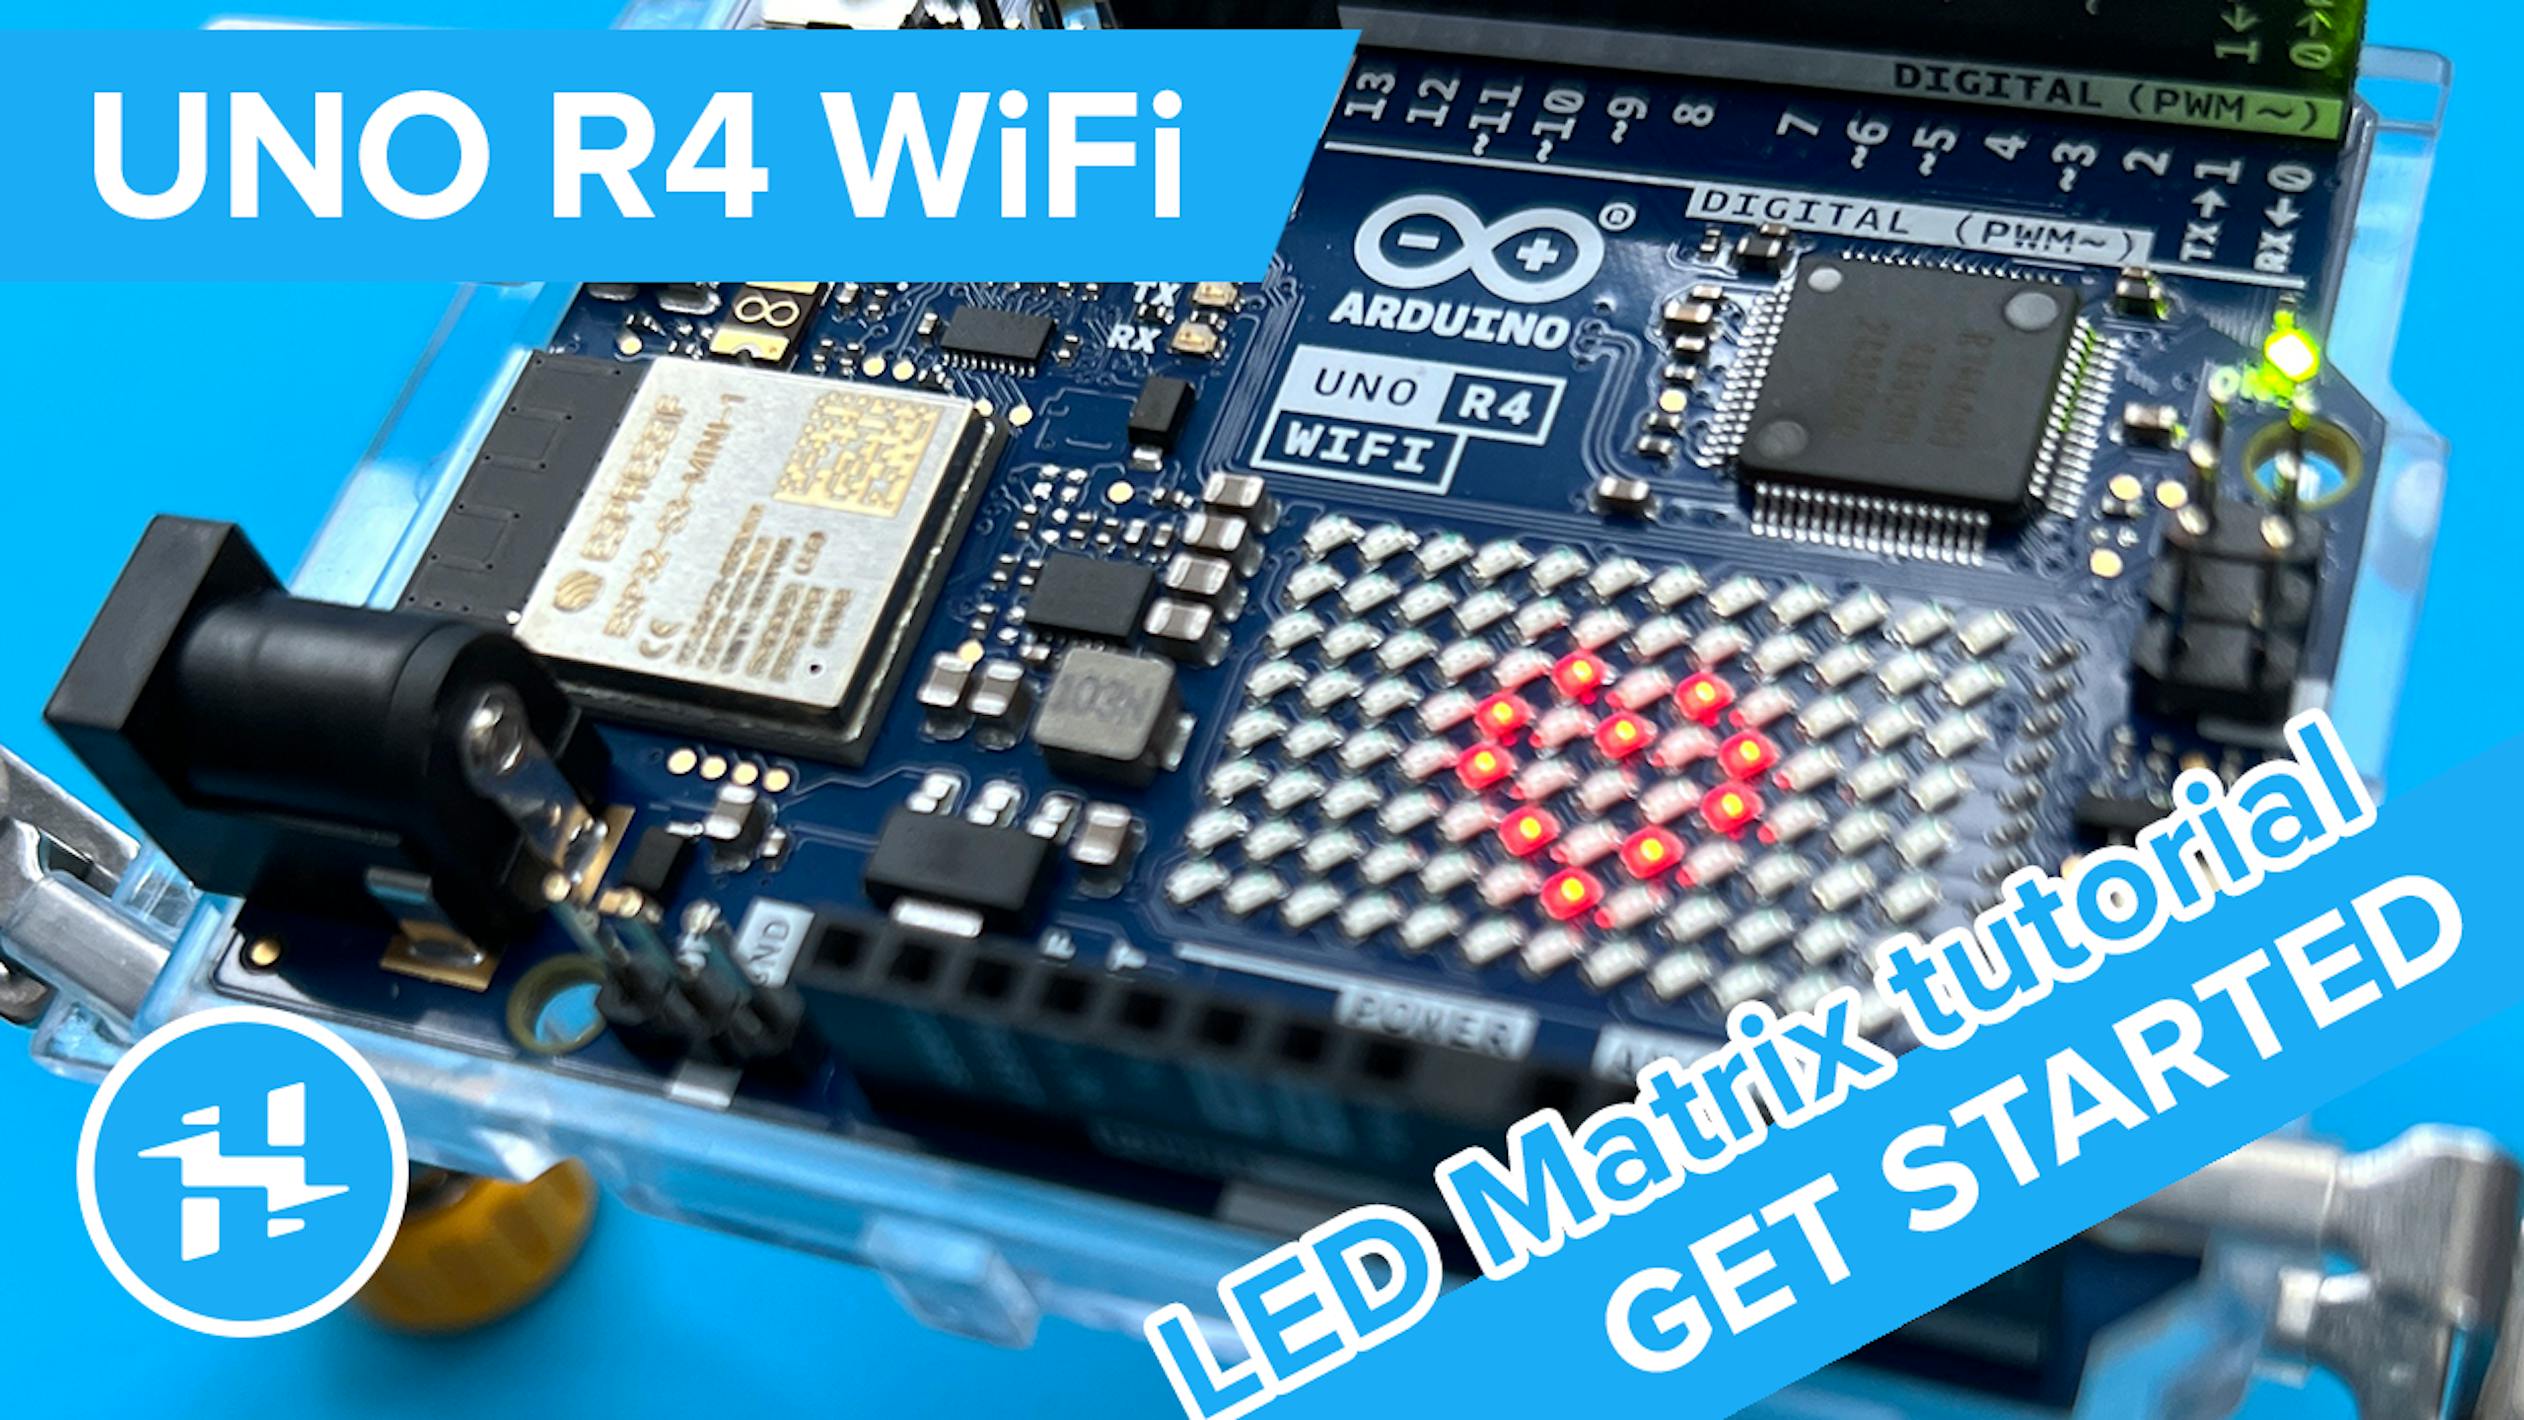 Getting started with your Arduino UNO R4 Minima